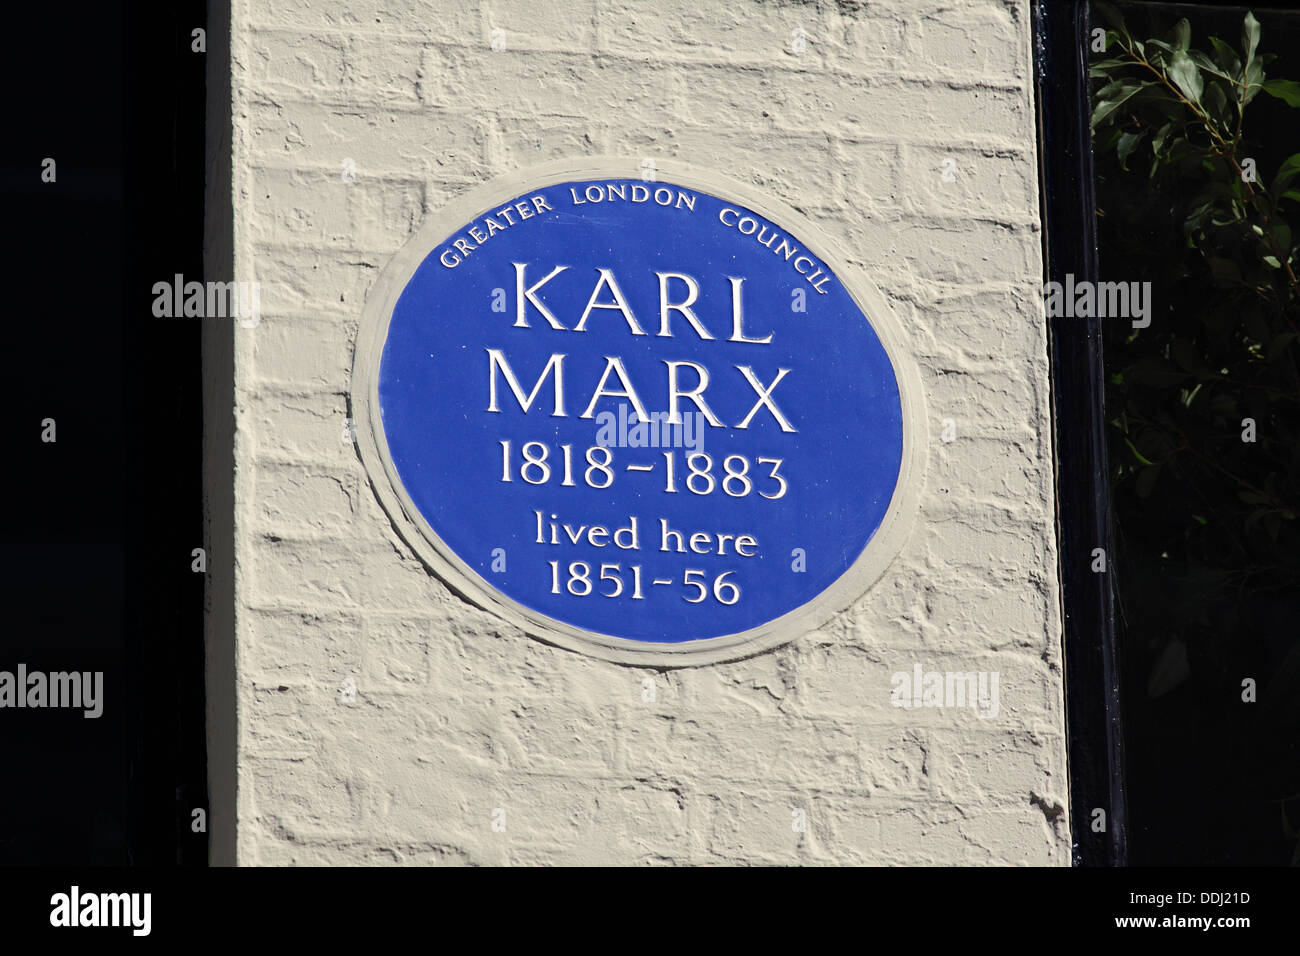 Blue plaque commemorating Karl Marx in Dean Street, London, He lived at this address in Soho in the 1850s. Stock Photo